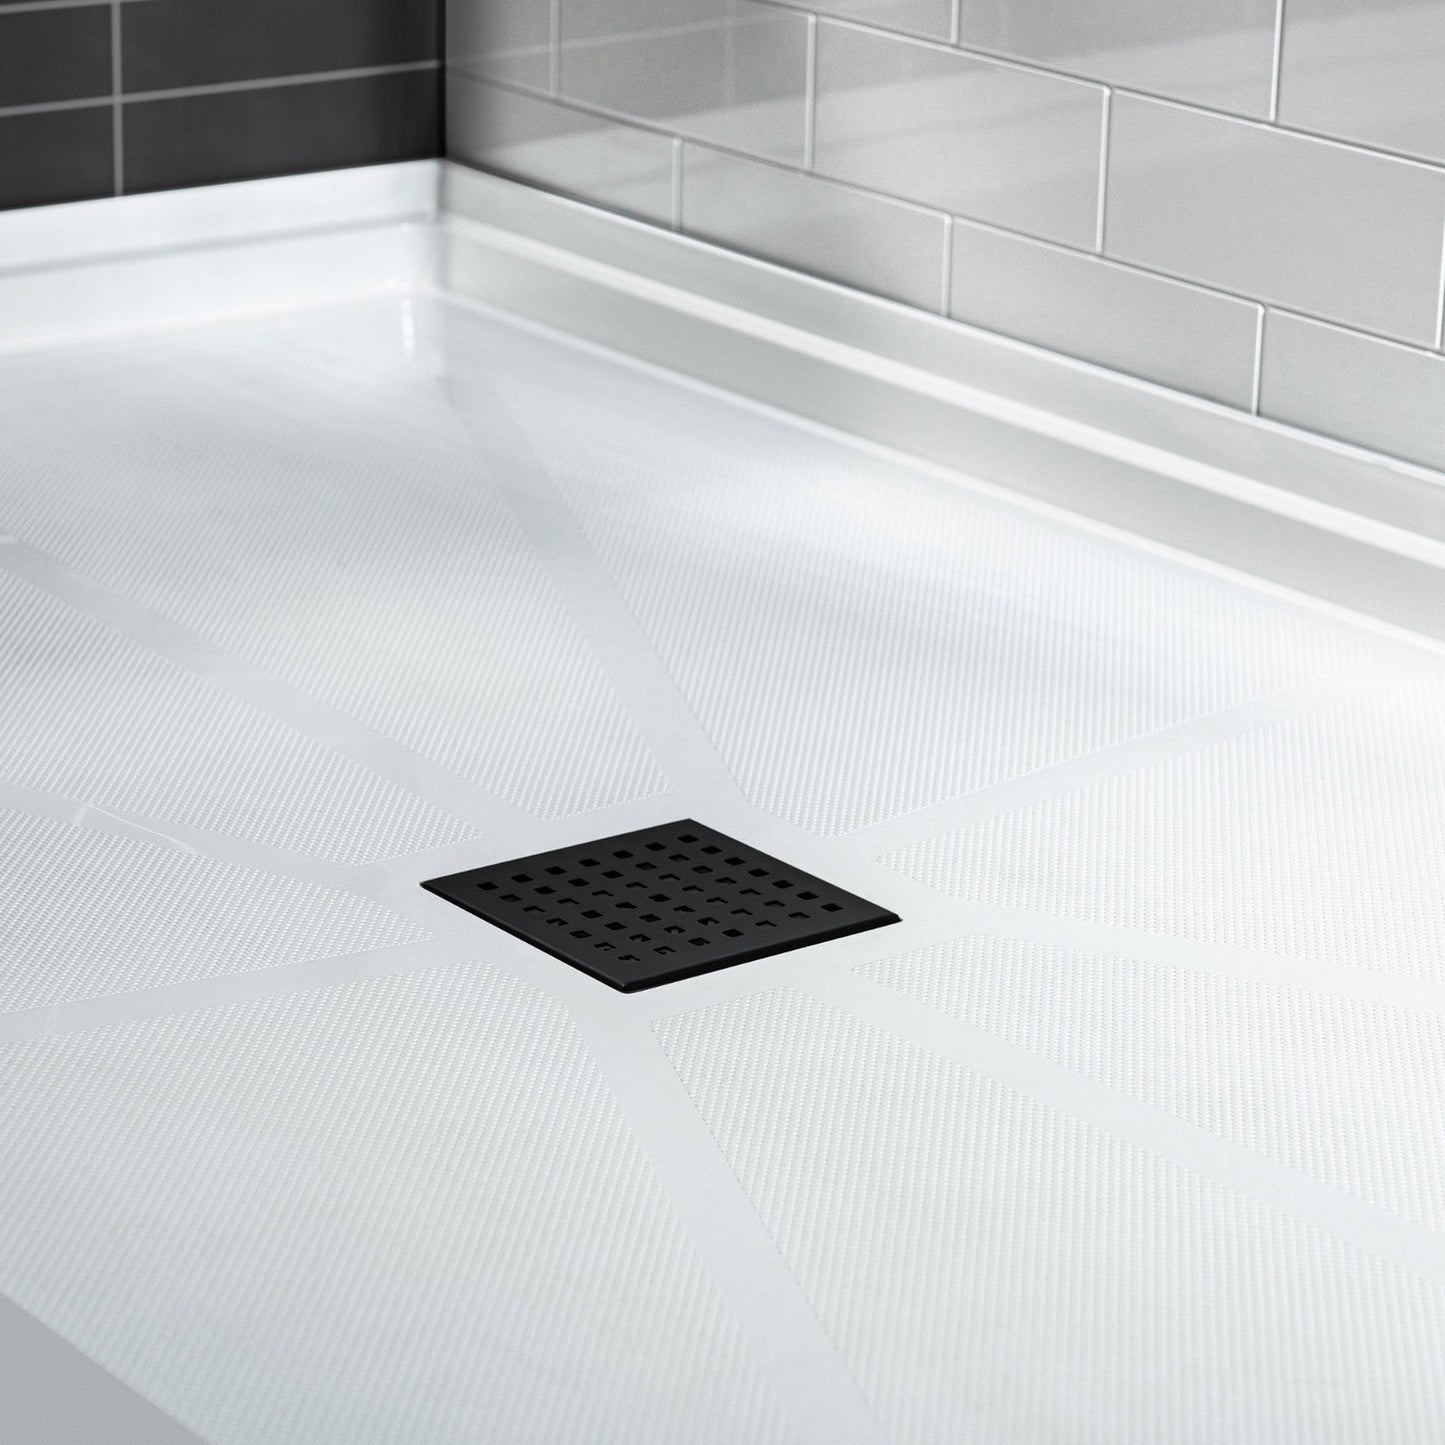 WoodBridge 60" x 34" White Solid Surface Shower Base Center Drain Location With Matte Black Trench Drain Cover